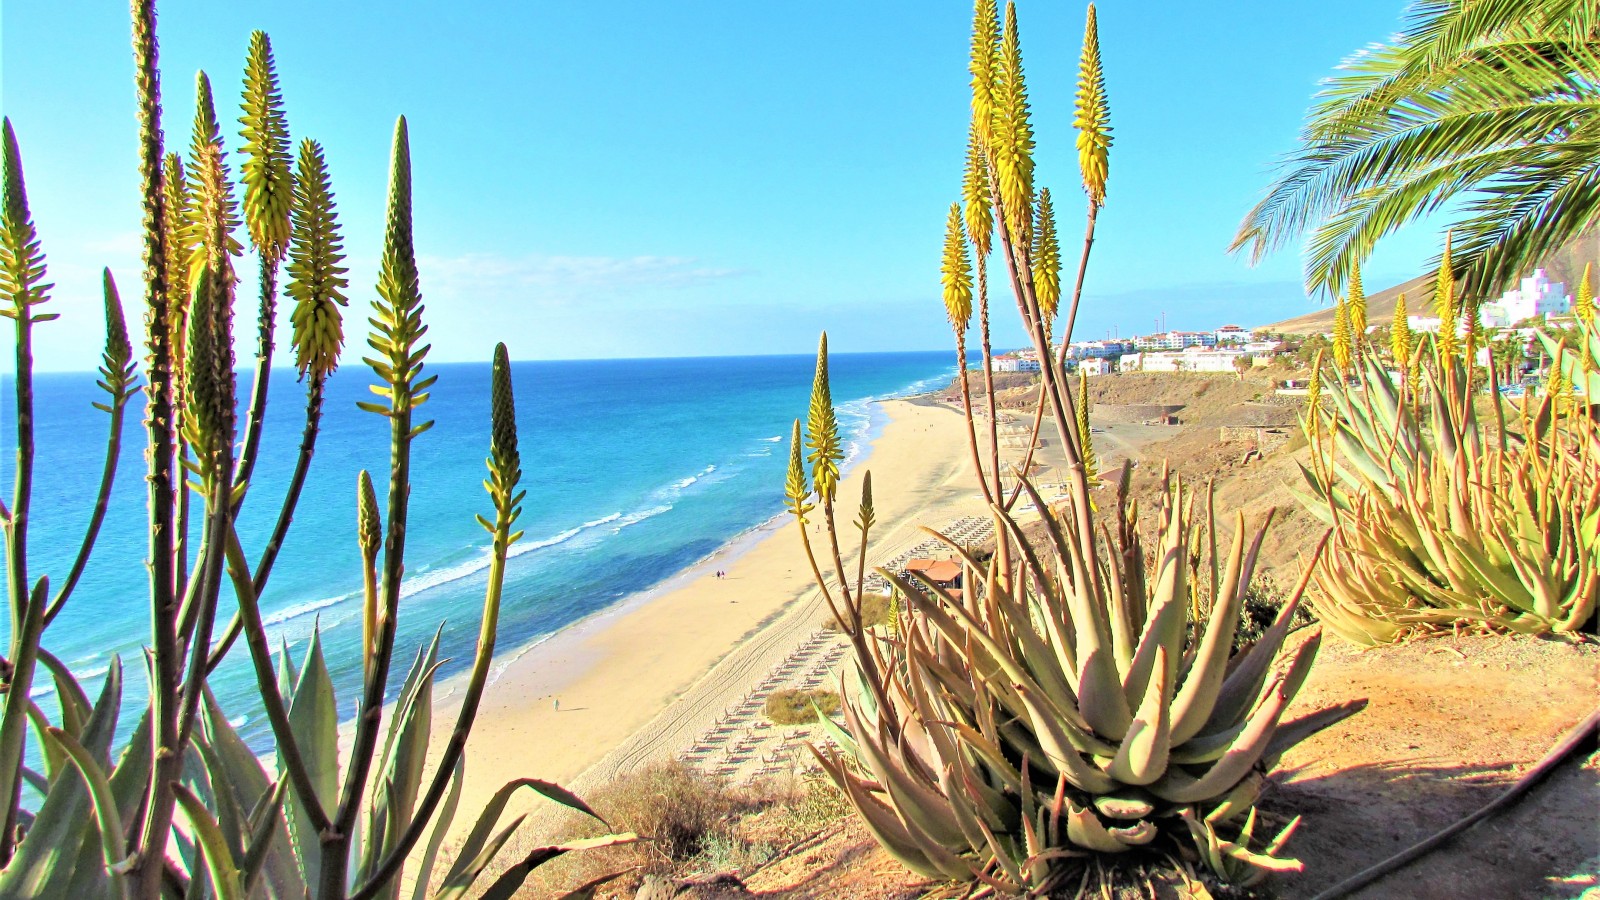 Fuerteventura is famous for its pristine coastline and arid landscapes